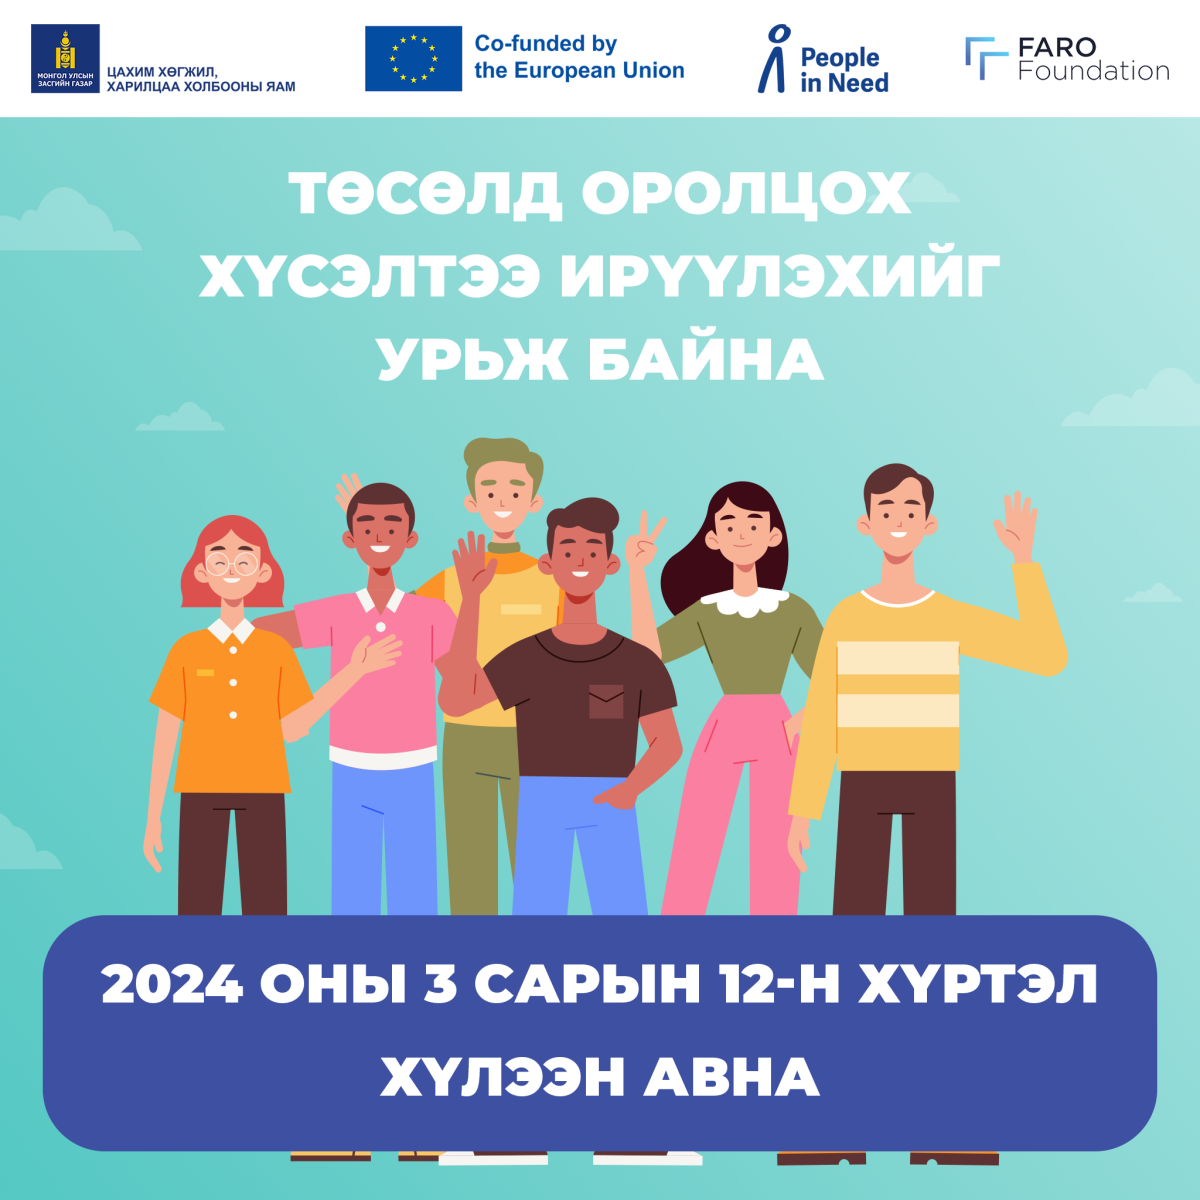 Call for Applications among Civil Society Organizations (CSOs) working with marginalized groups in Ulaanbaatar City and Umnugobi province to participate in Digital Inclusion through the CSO empowerment (DICE) project.